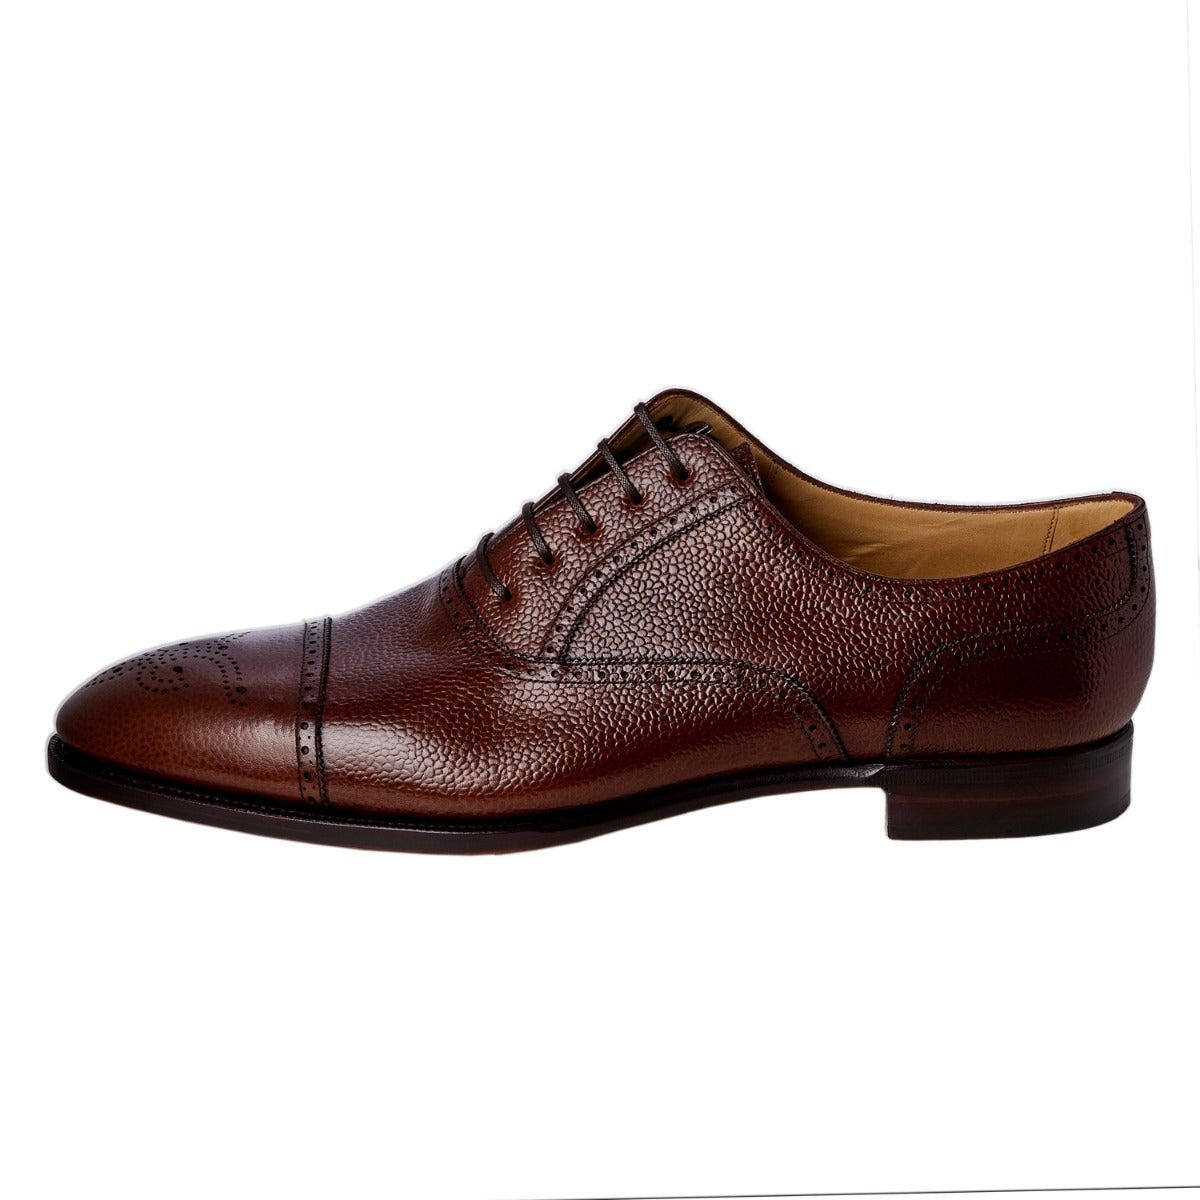 A TLB Antique Brown Pebble Grain Semi-Brogue 13UK men's brown derby shoe made-to-order by KirbyAllison.com.